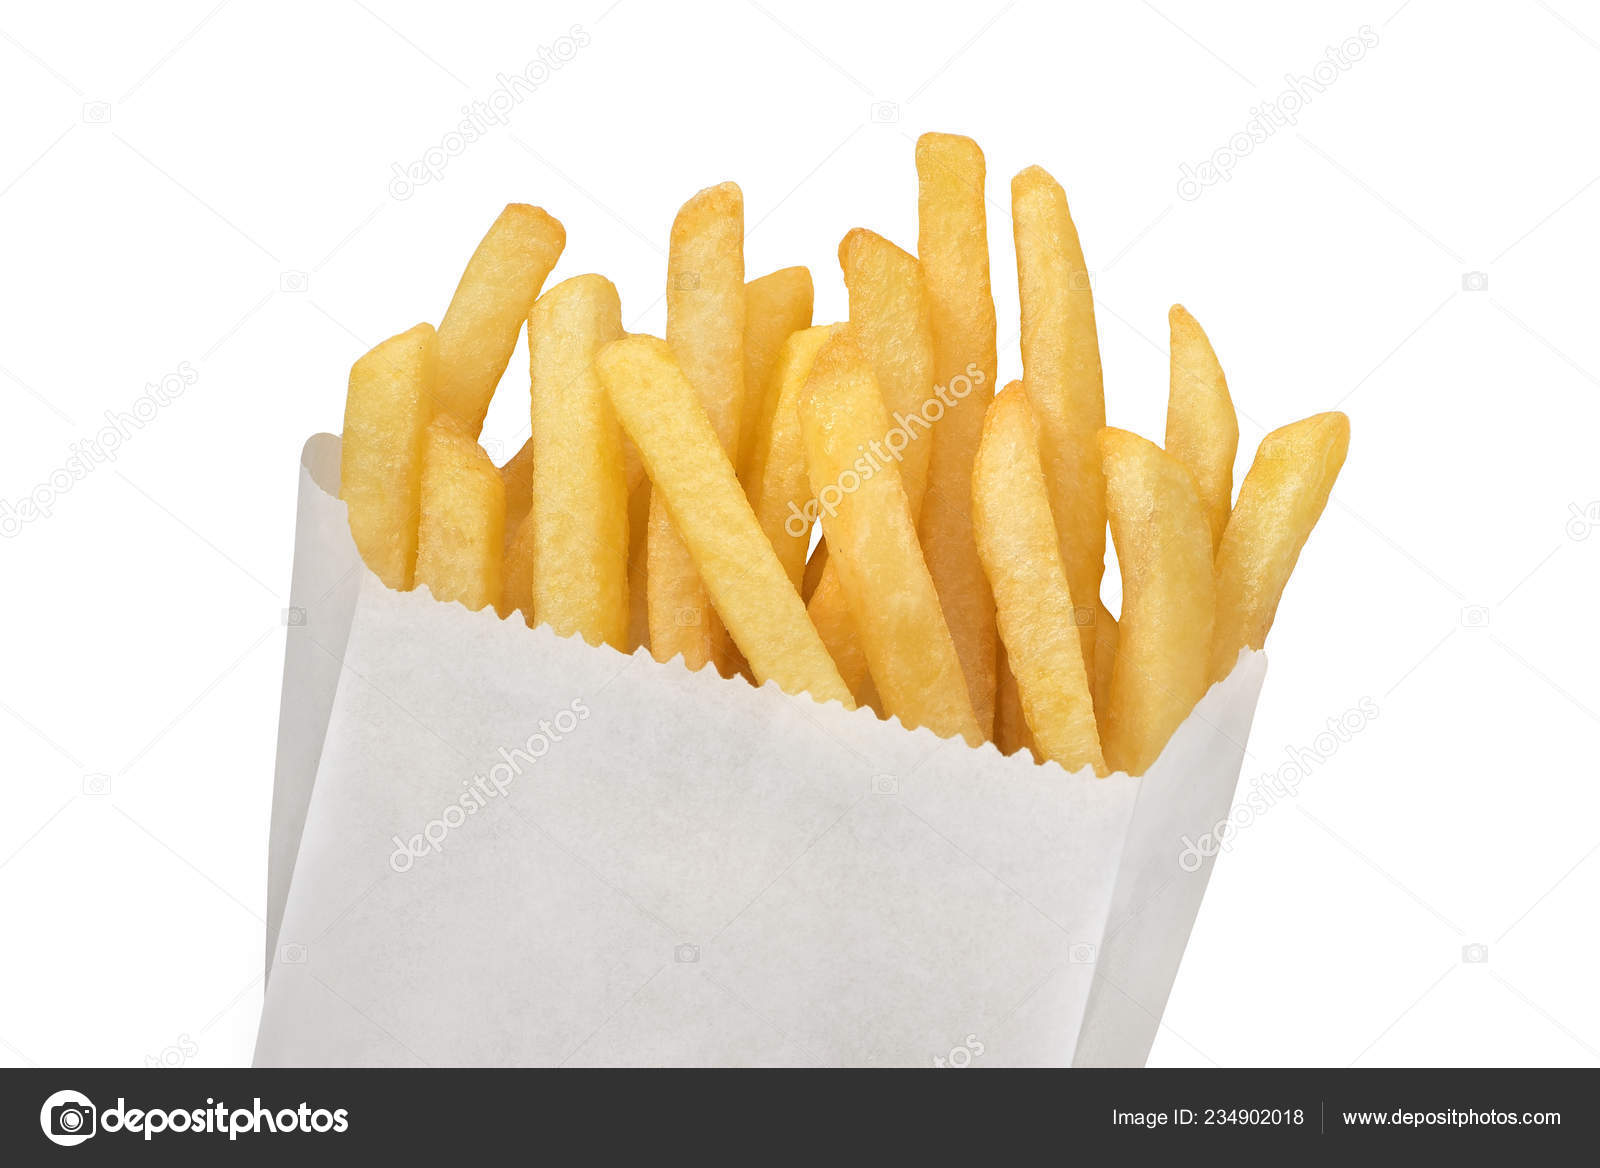 paper french fries bag